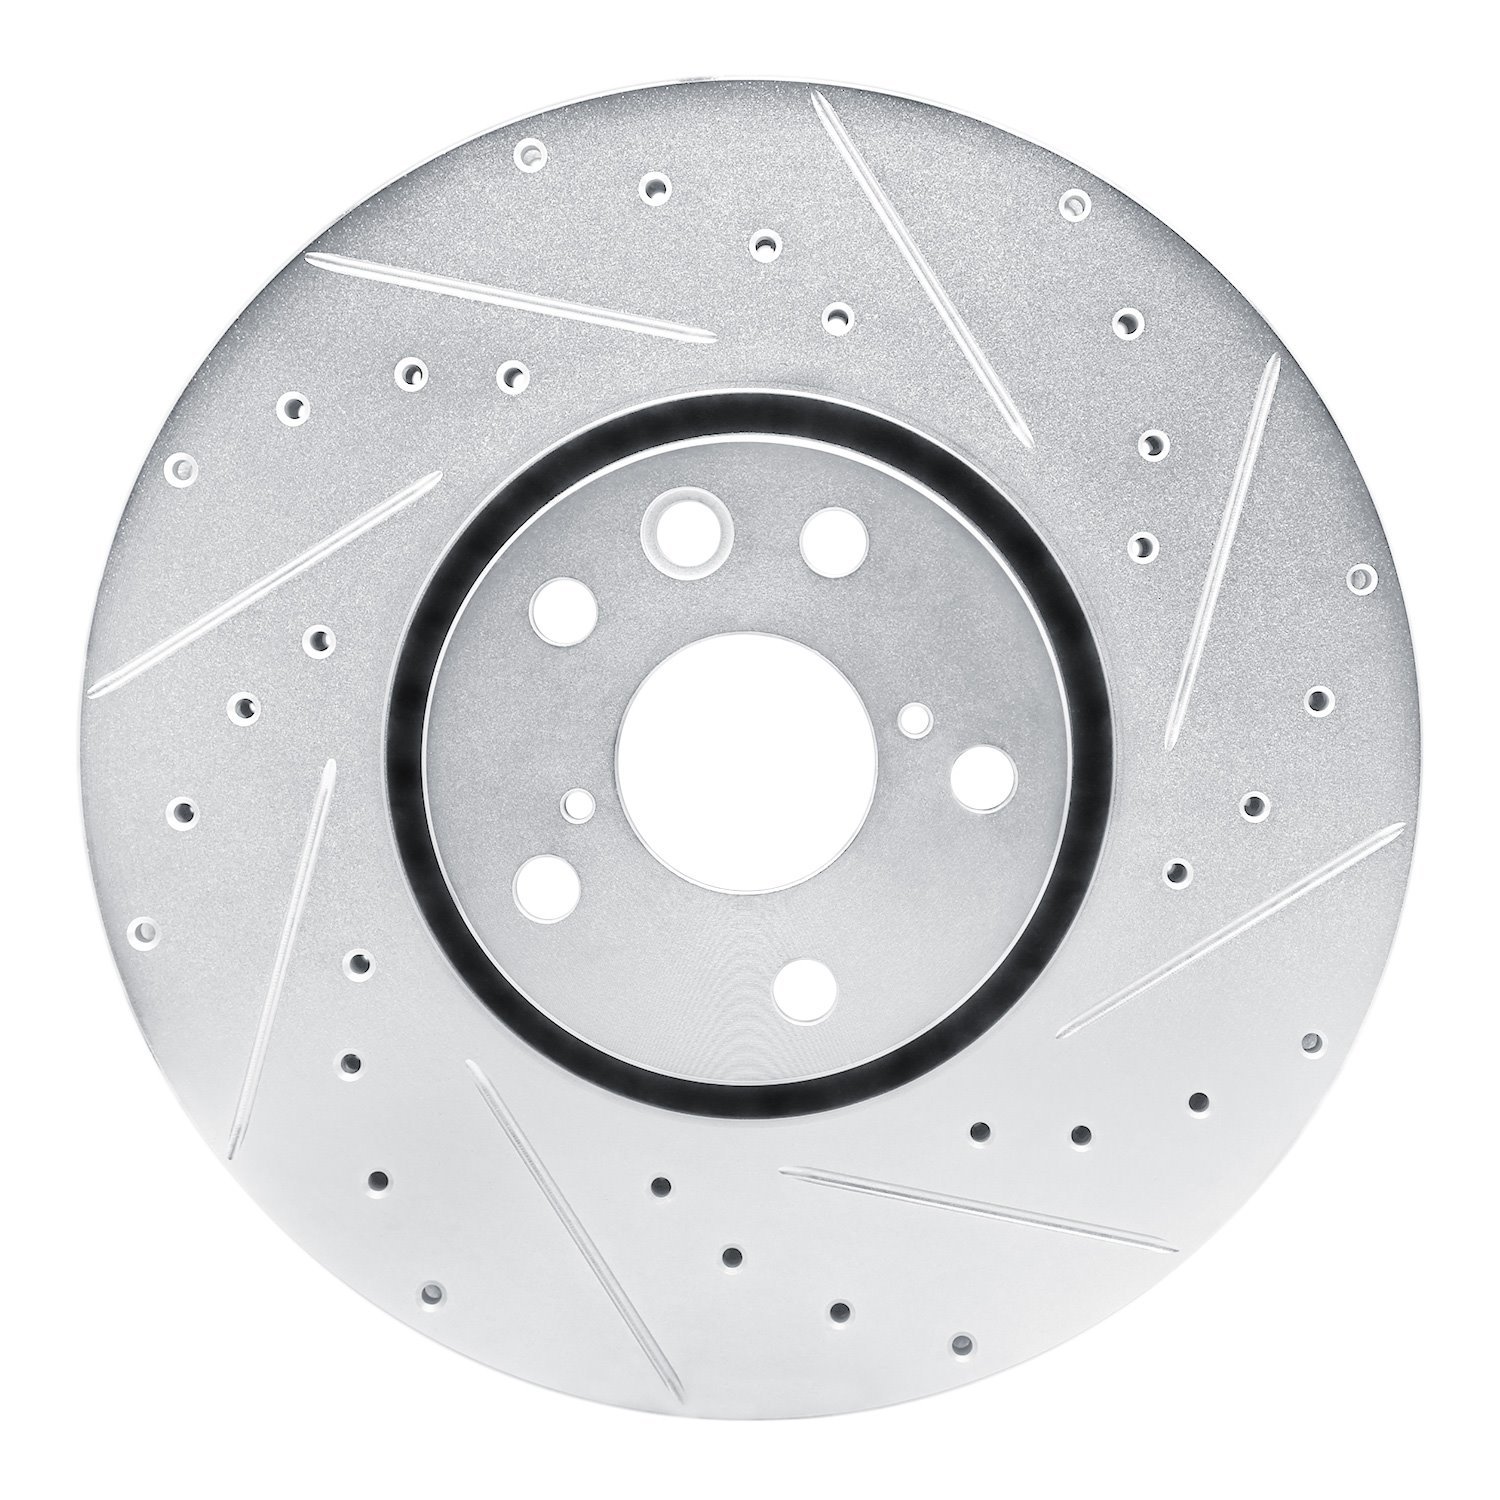 E-Line Drilled & Slotted Silver Brake Rotor, Fits Select Fits Multiple Makes/Models, Position: Right Front